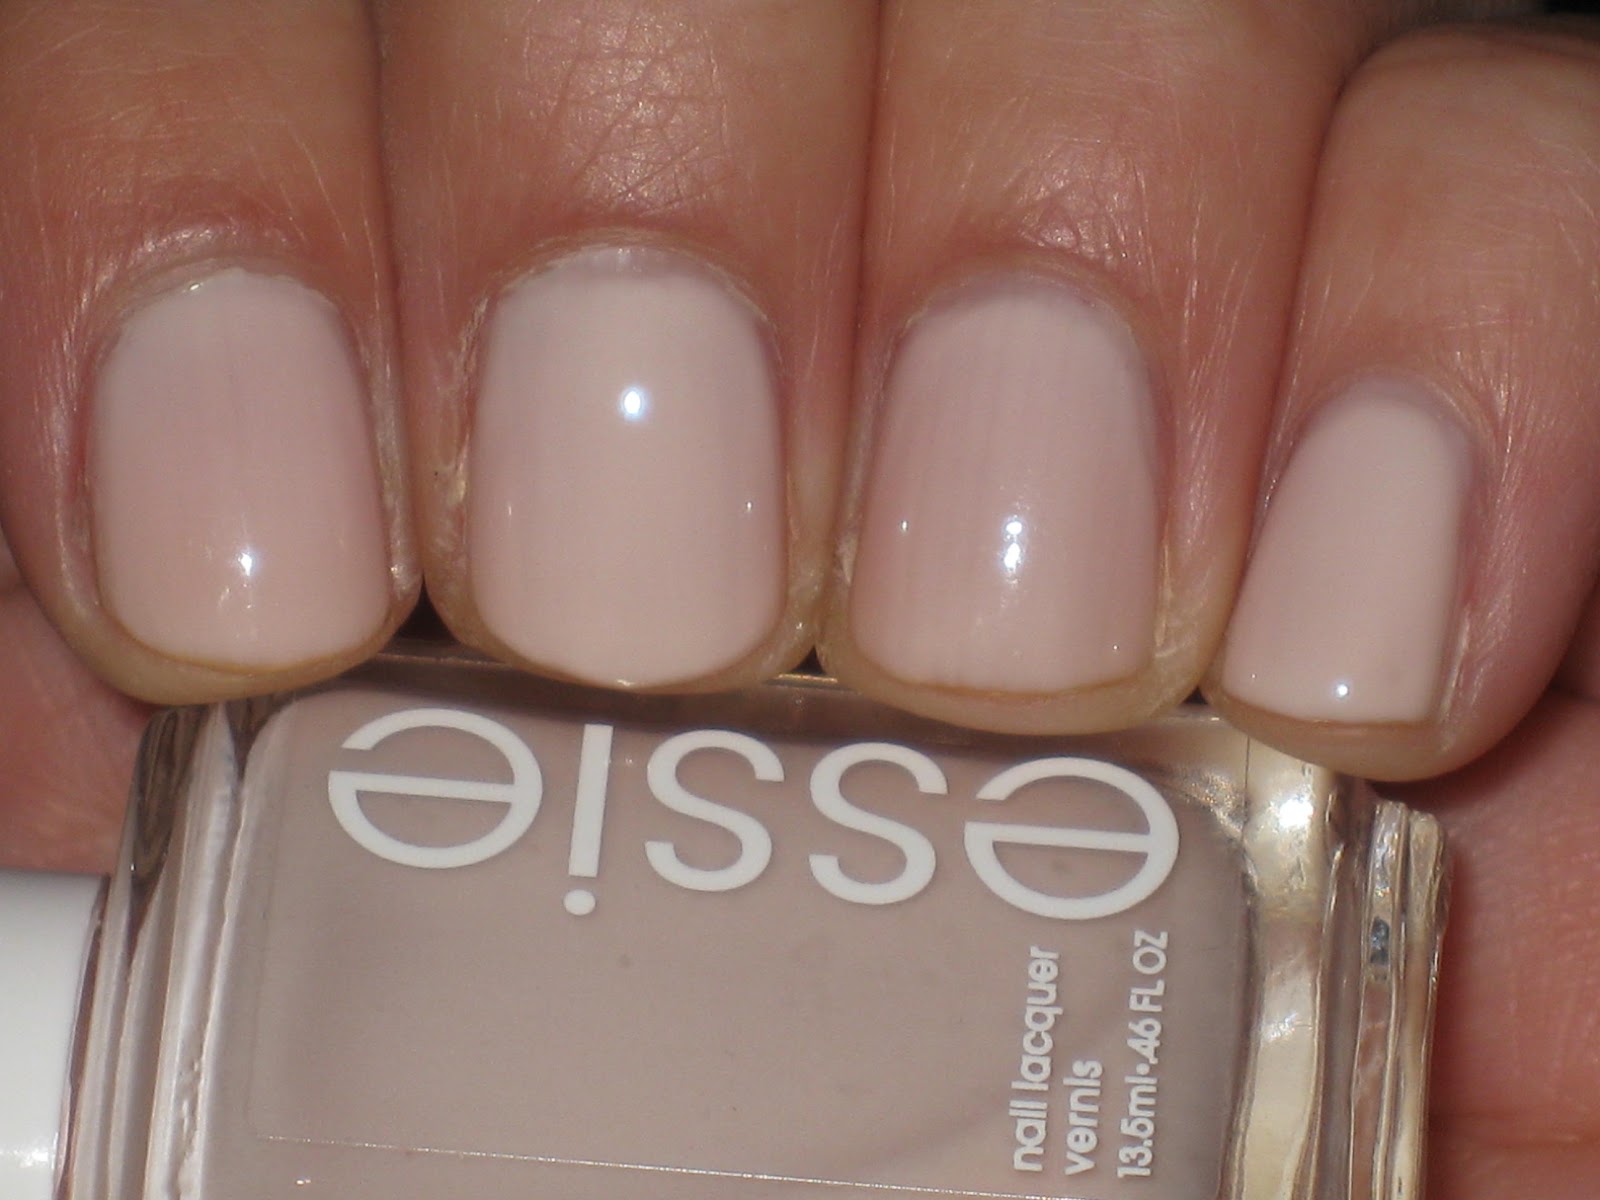 2. Essie Nail Polish in "Ballet Slippers" - wide 8